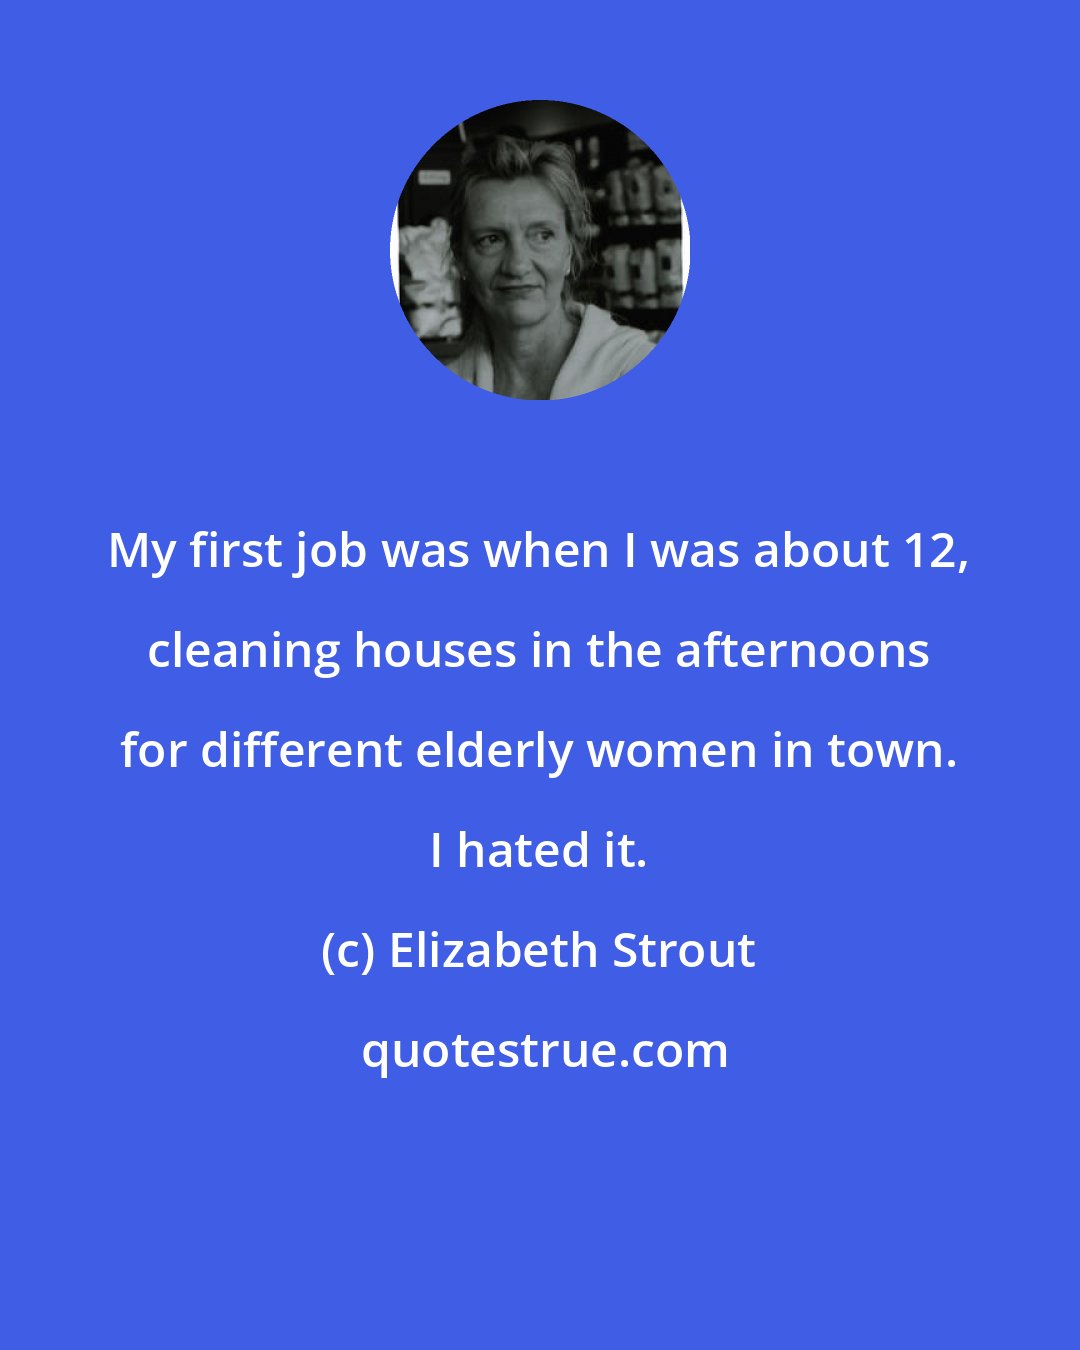 Elizabeth Strout: My first job was when I was about 12, cleaning houses in the afternoons for different elderly women in town. I hated it.